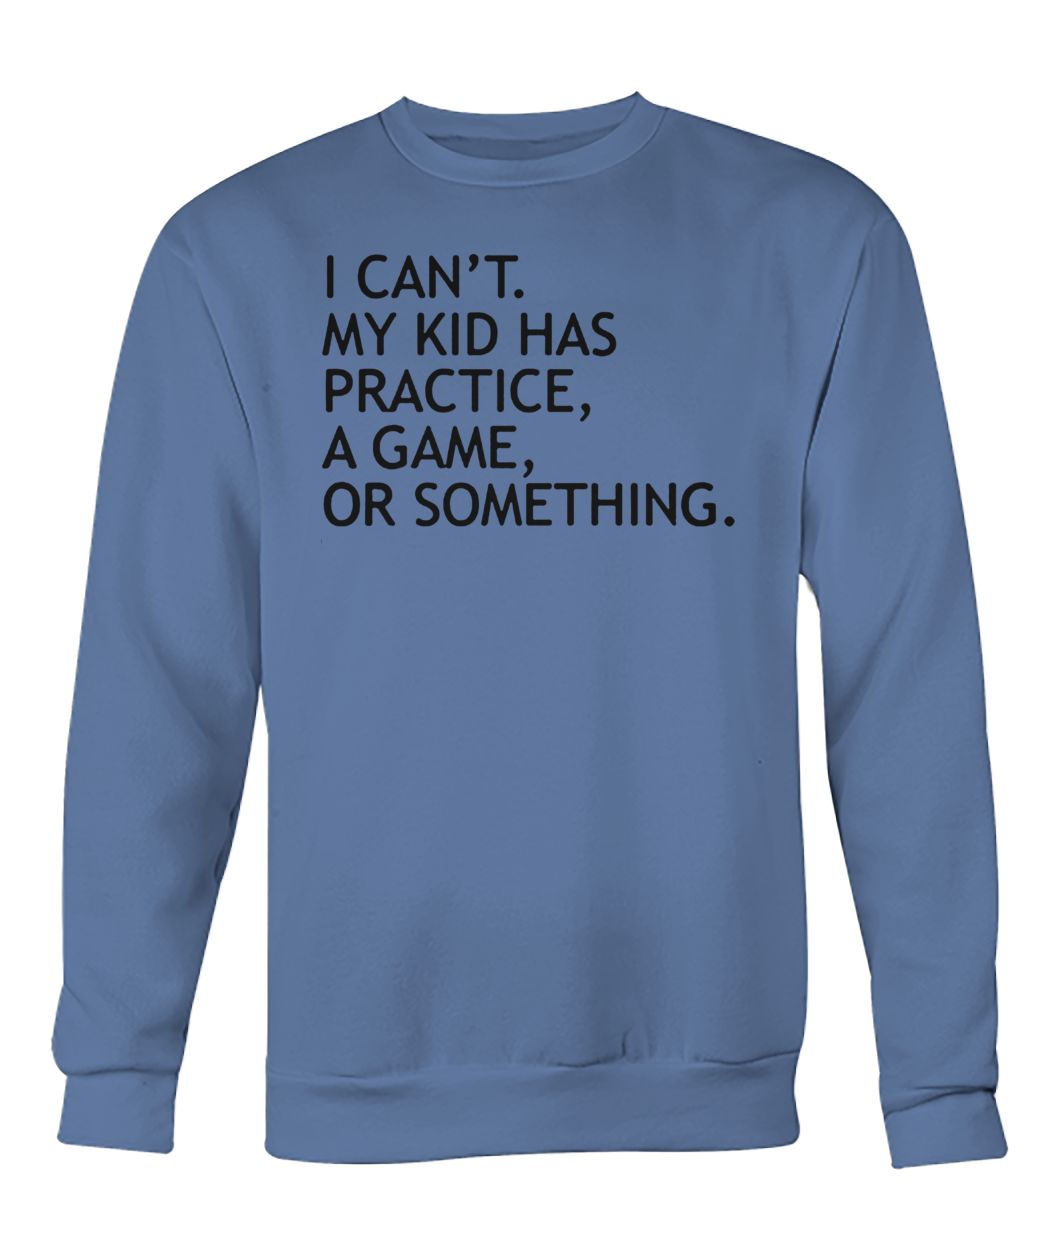 I can't my kid has practice a game or something crew neck sweatshirt